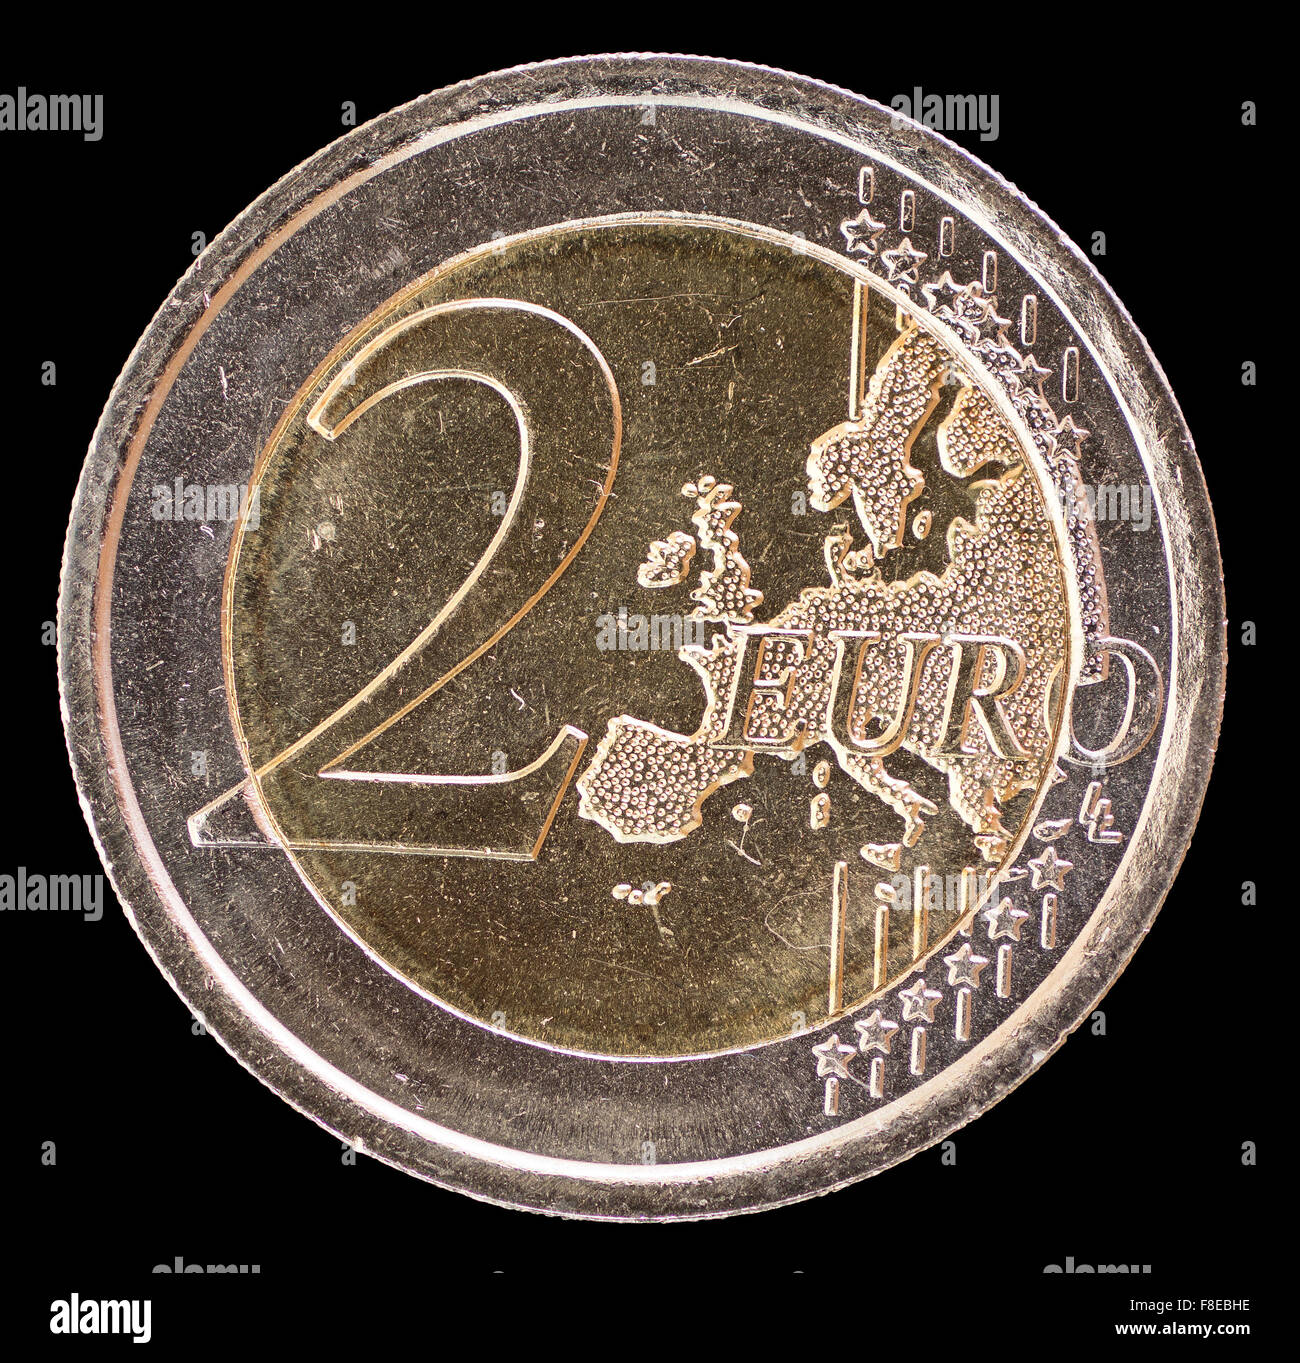 Common side of two euro coin isolated on a black background. The reverse face displays a map of Europe and was designed by Luc L Stock Photo